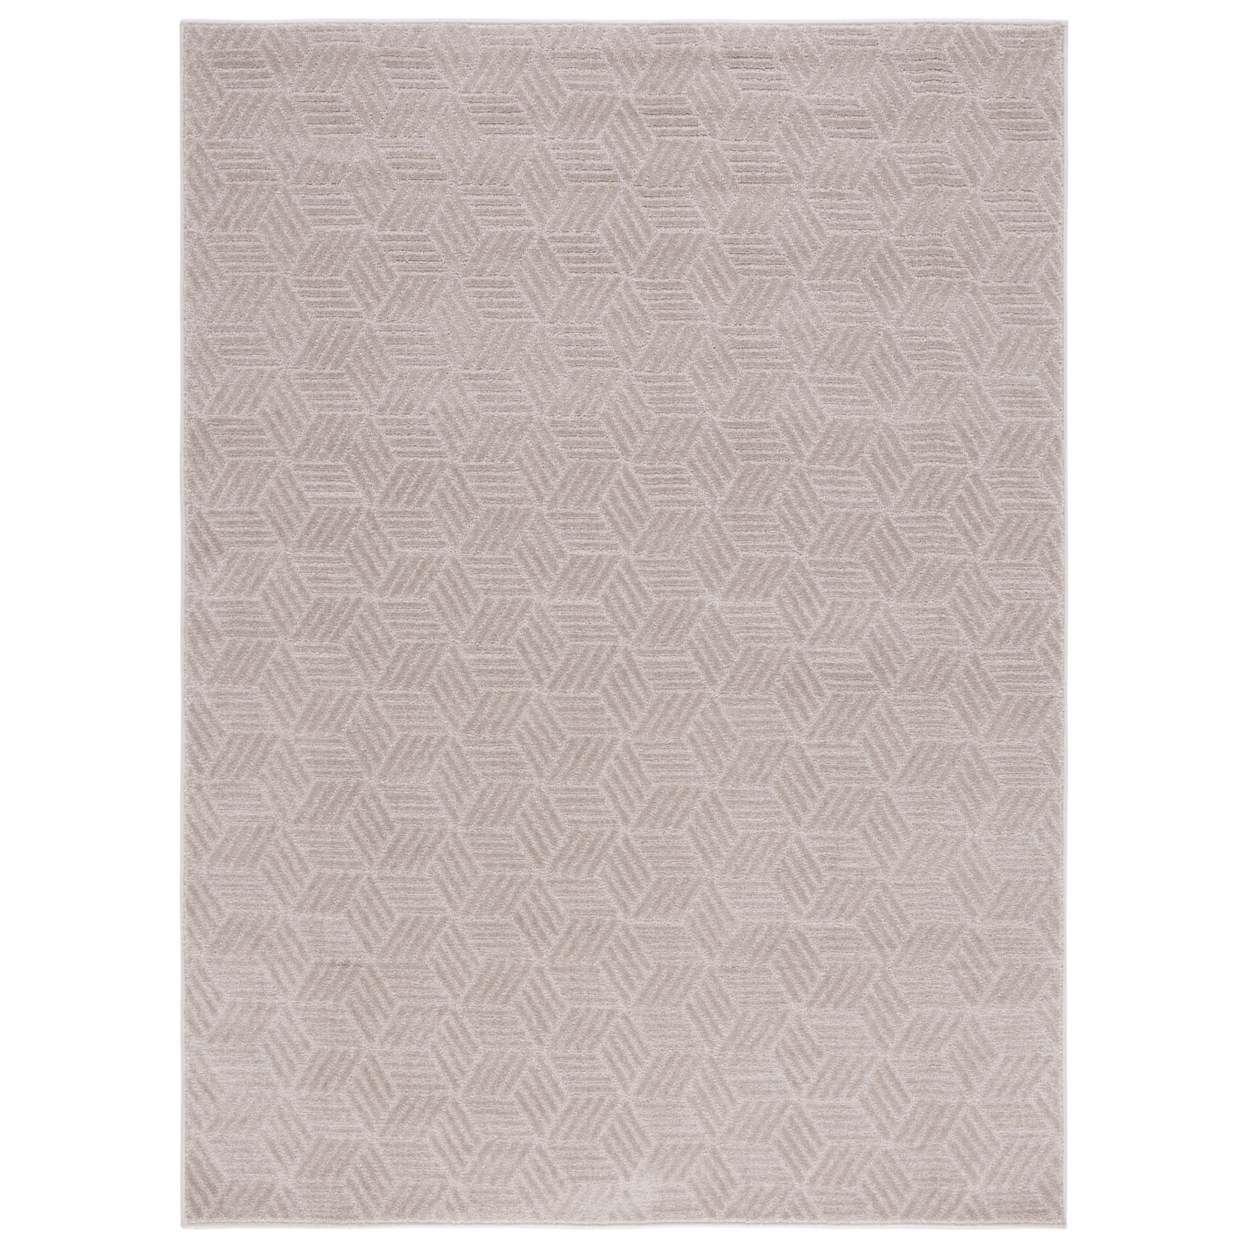 Safavieh PNS410B Pattern And Solid Beige - Pink / Ivory, 8' X 10' Rectangle